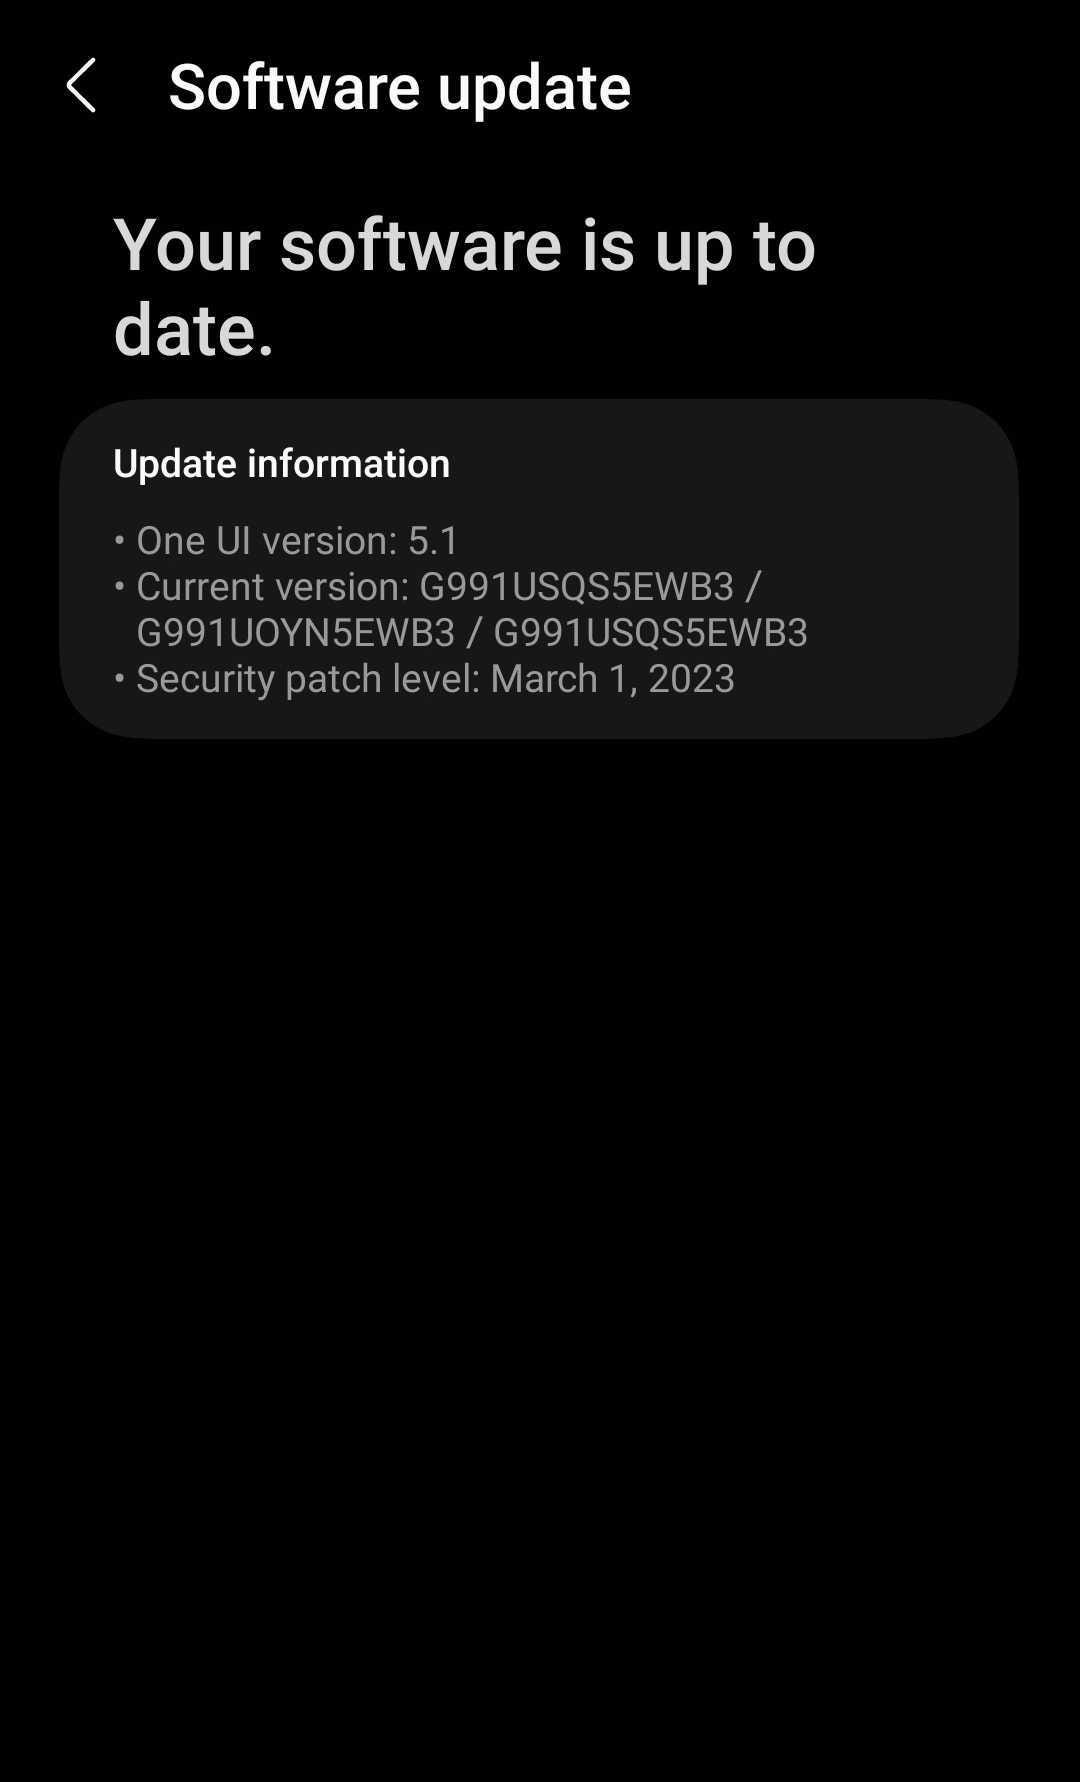 An updated patch shown for a Samsung Galaxy phone.